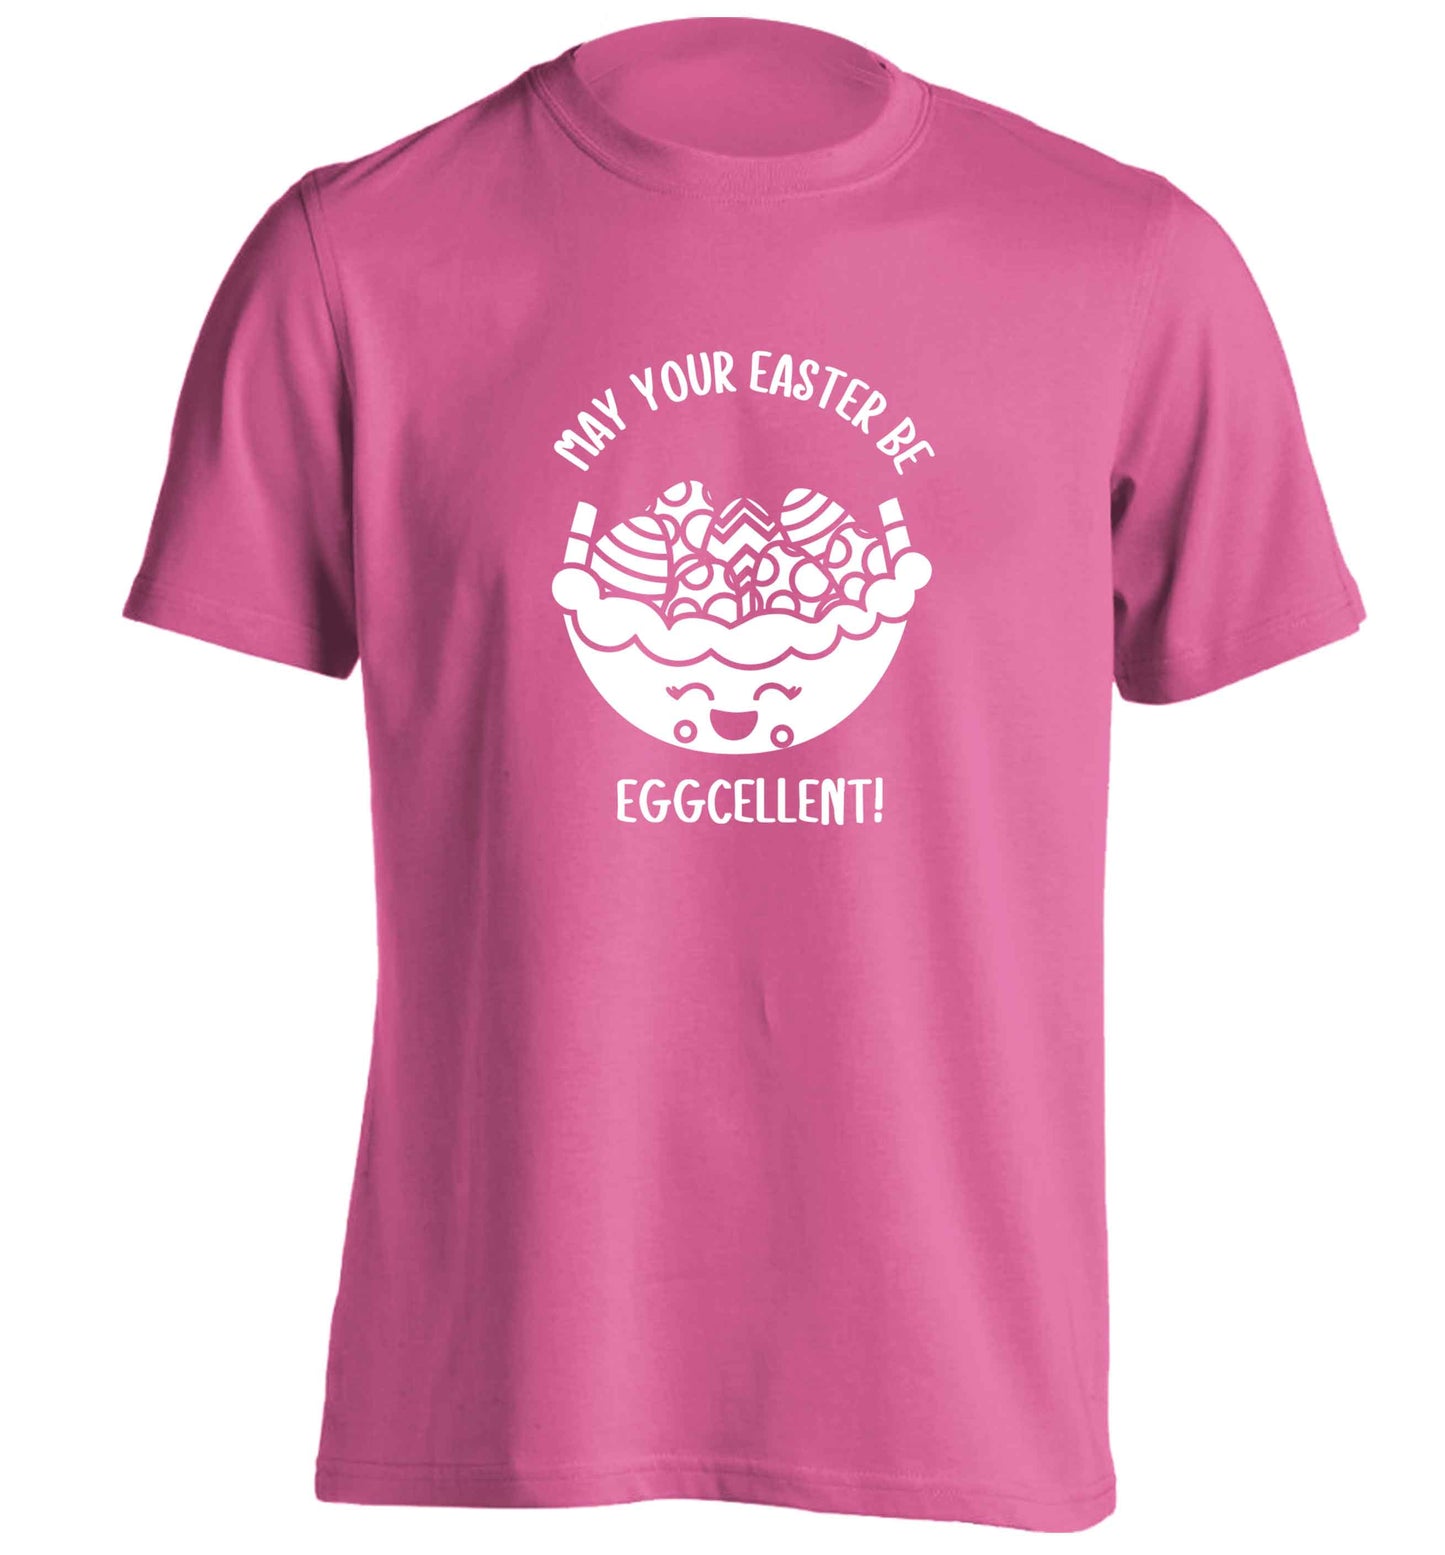 May your Easter be eggcellent adults unisex pink Tshirt 2XL